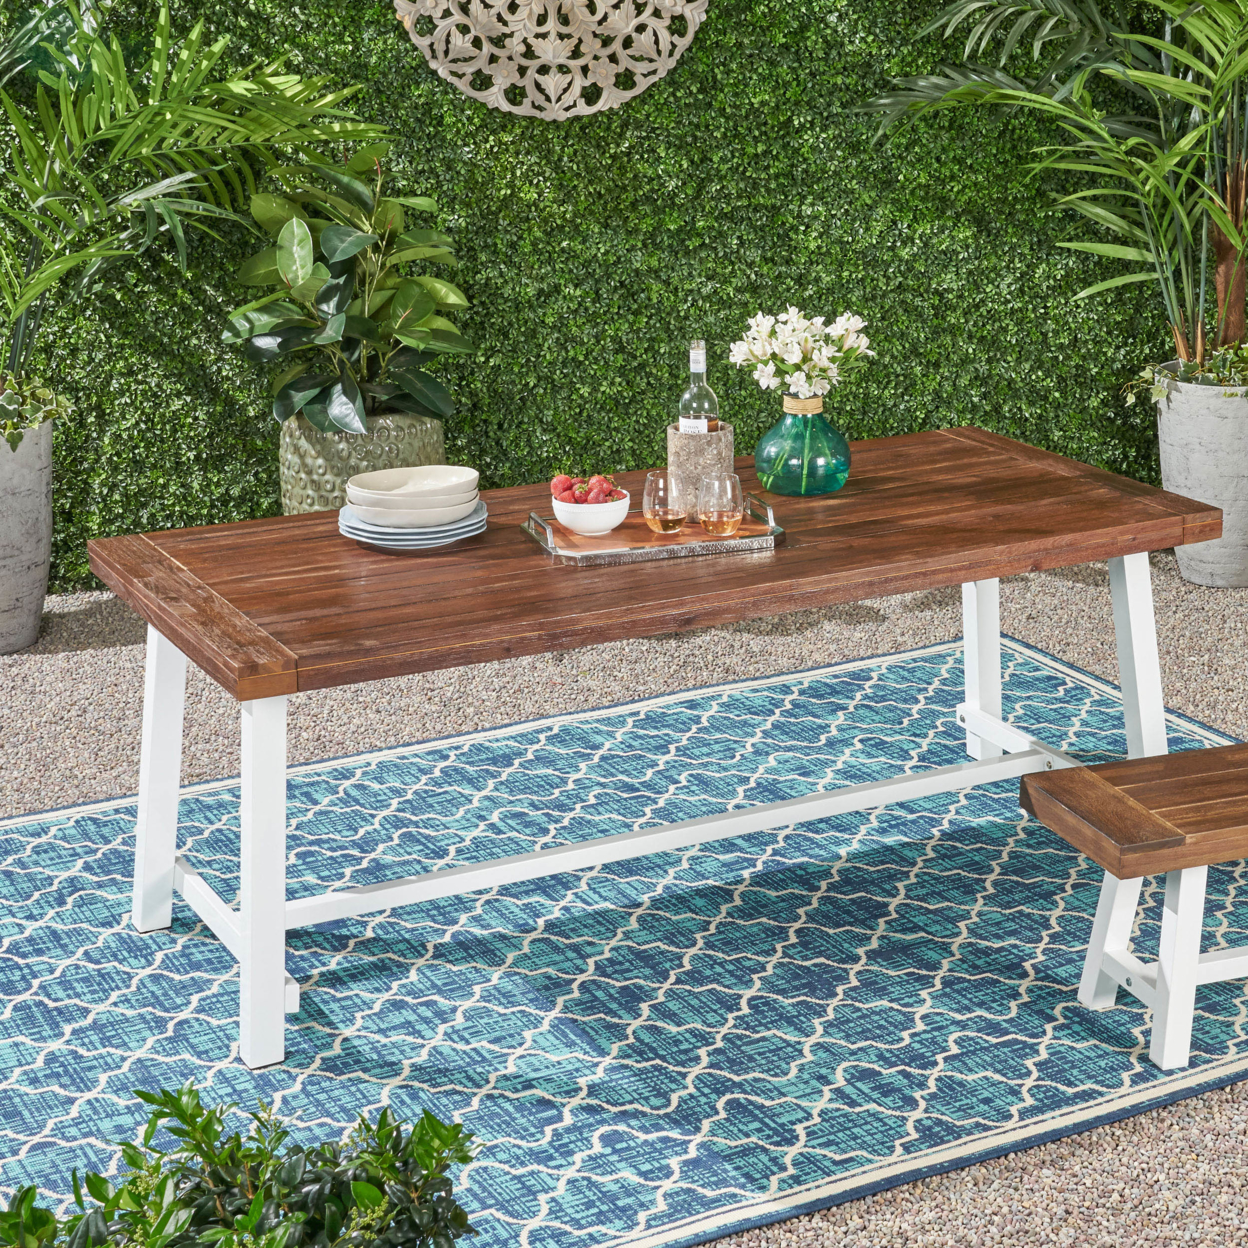 Beau Outdoor Eight Seater Wooden Dining Table - Teak Finish + Rustic Metal Finish